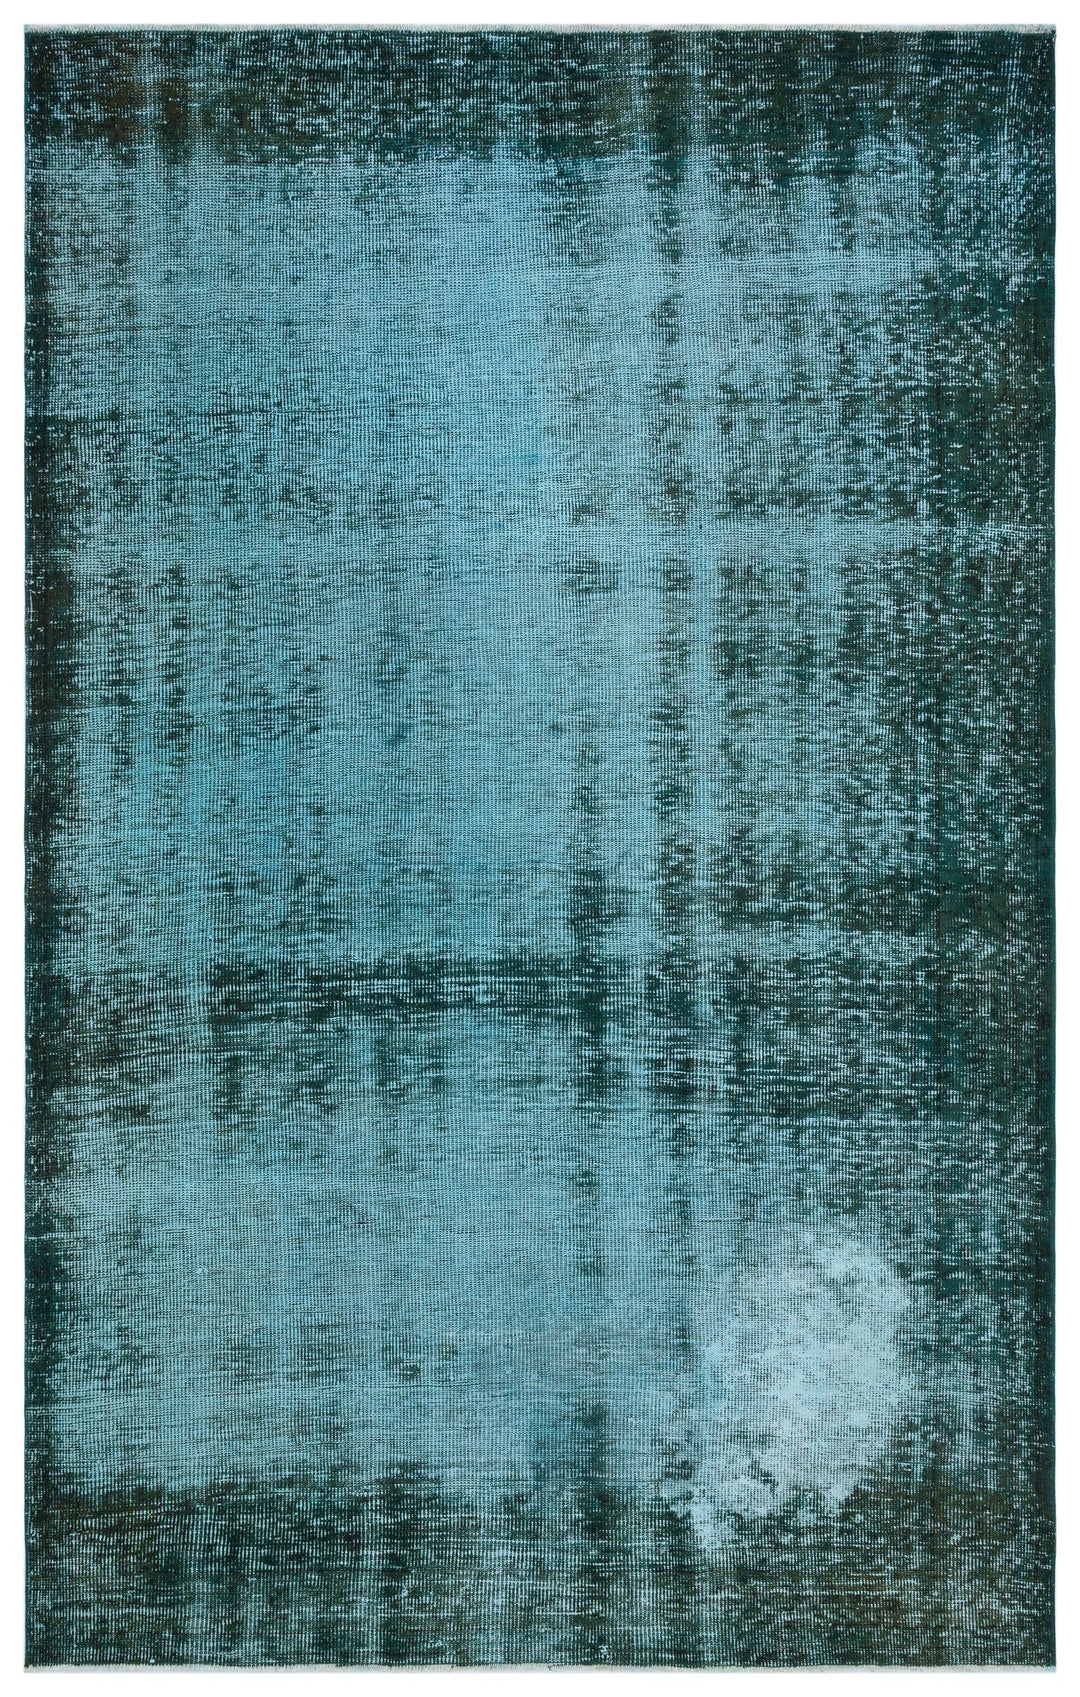 Athens Turquoise Tumbled Wool Hand Woven Rug 171 x 274